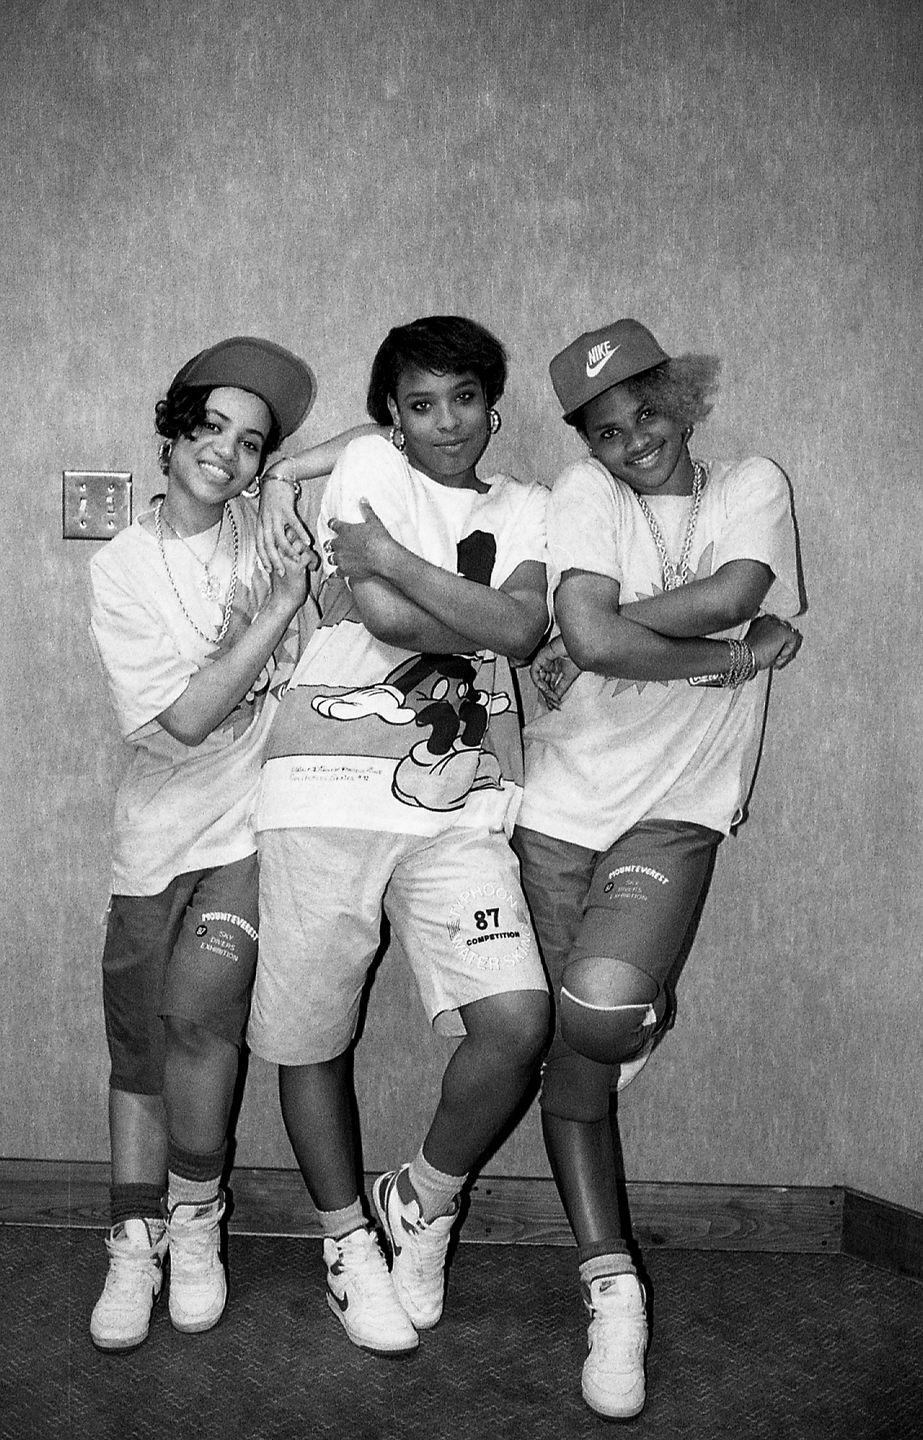 <p>DJ Spinderella, Salt, and Pepa from the hit '80s group Salt-N-Pepa are backstage after a performance at the Holiday Star Theatre in Merrillville, Indiana in 1987. </p>